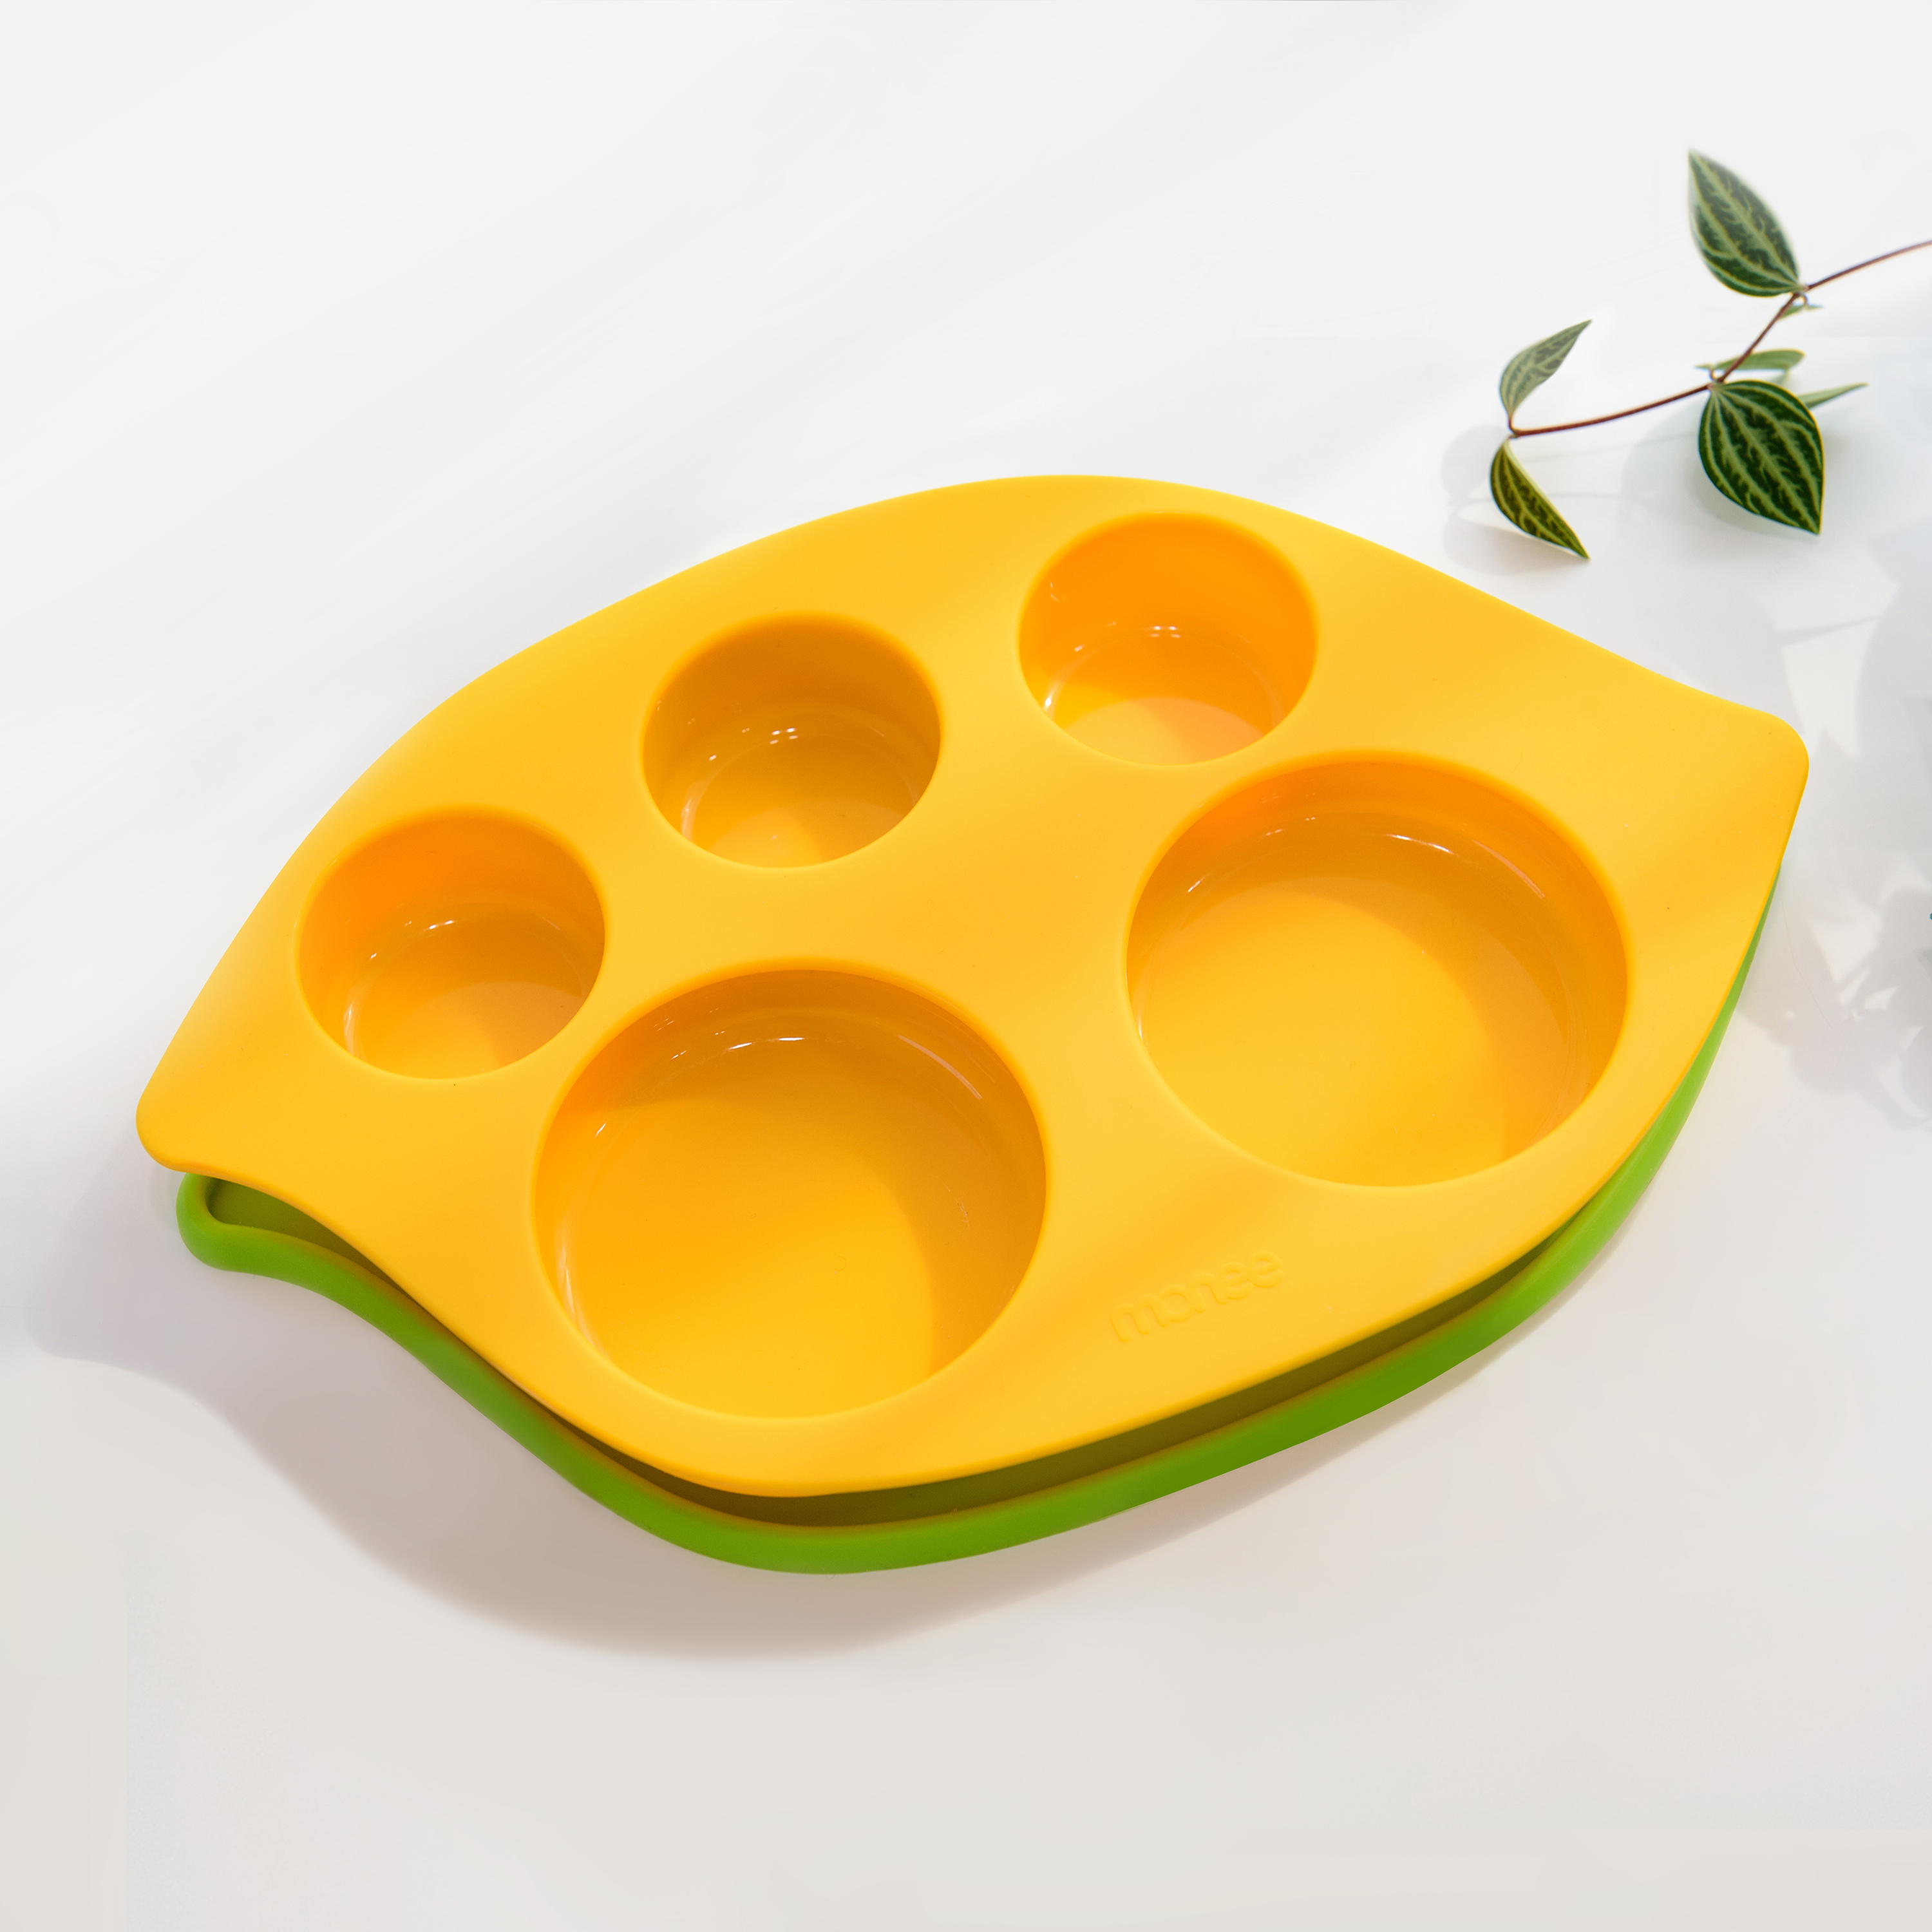 Pea Pod Silicone Suction Food Plate / Divided Plate   Baby Feeding  Suction  Non-Slip  Dishwasher oven Safe  BPA Free  Baby Utensils